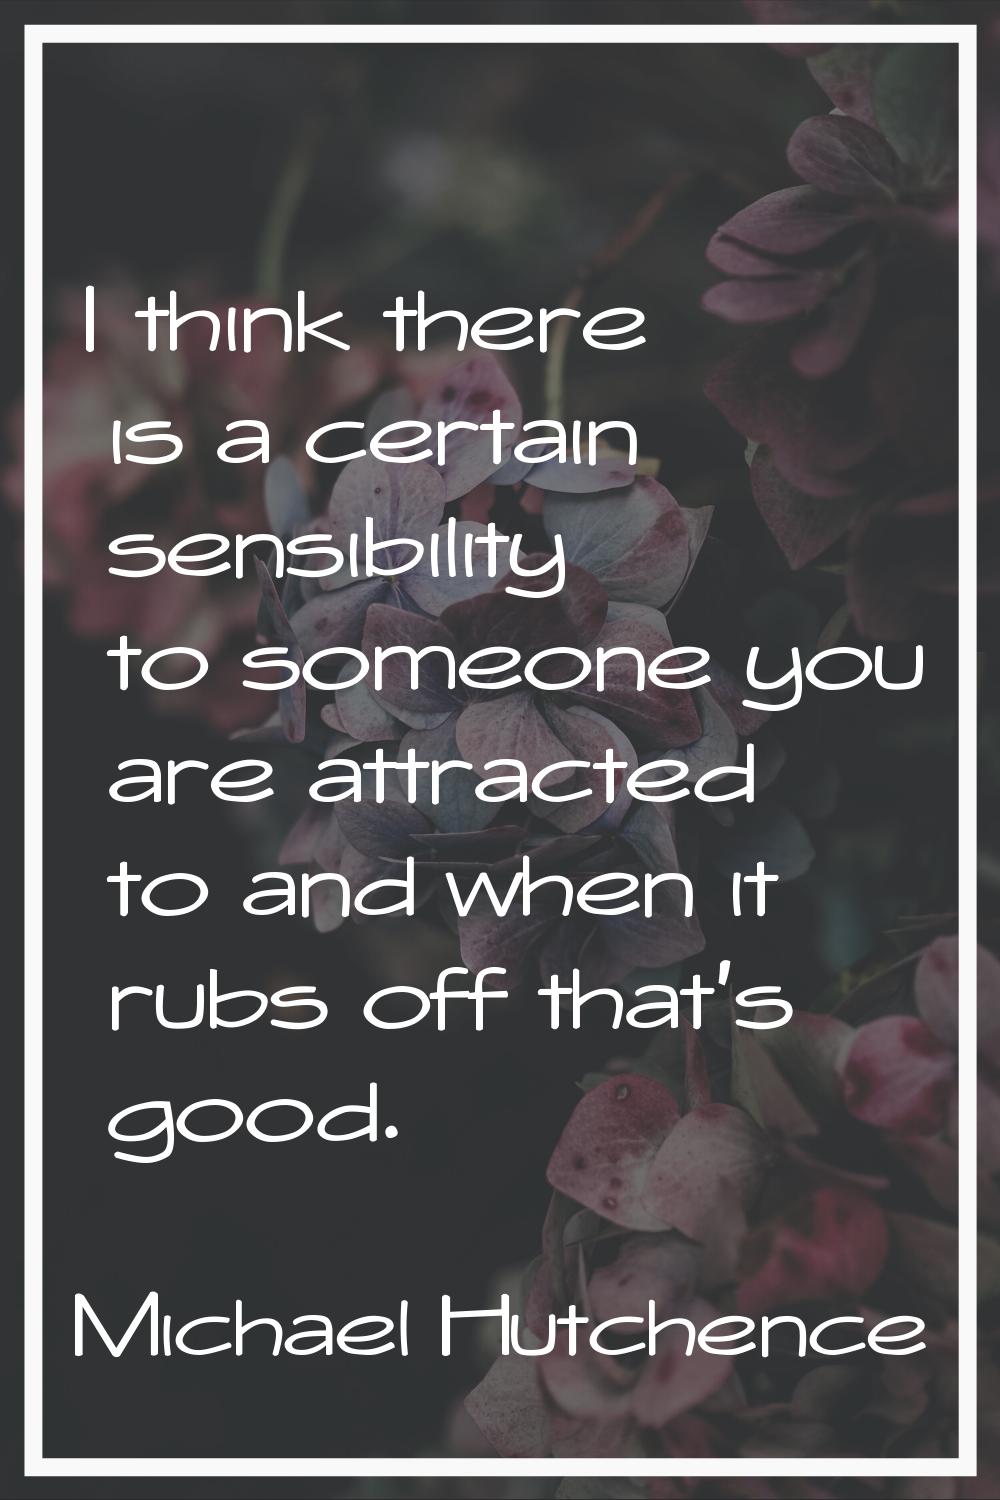 I think there is a certain sensibility to someone you are attracted to and when it rubs off that's 